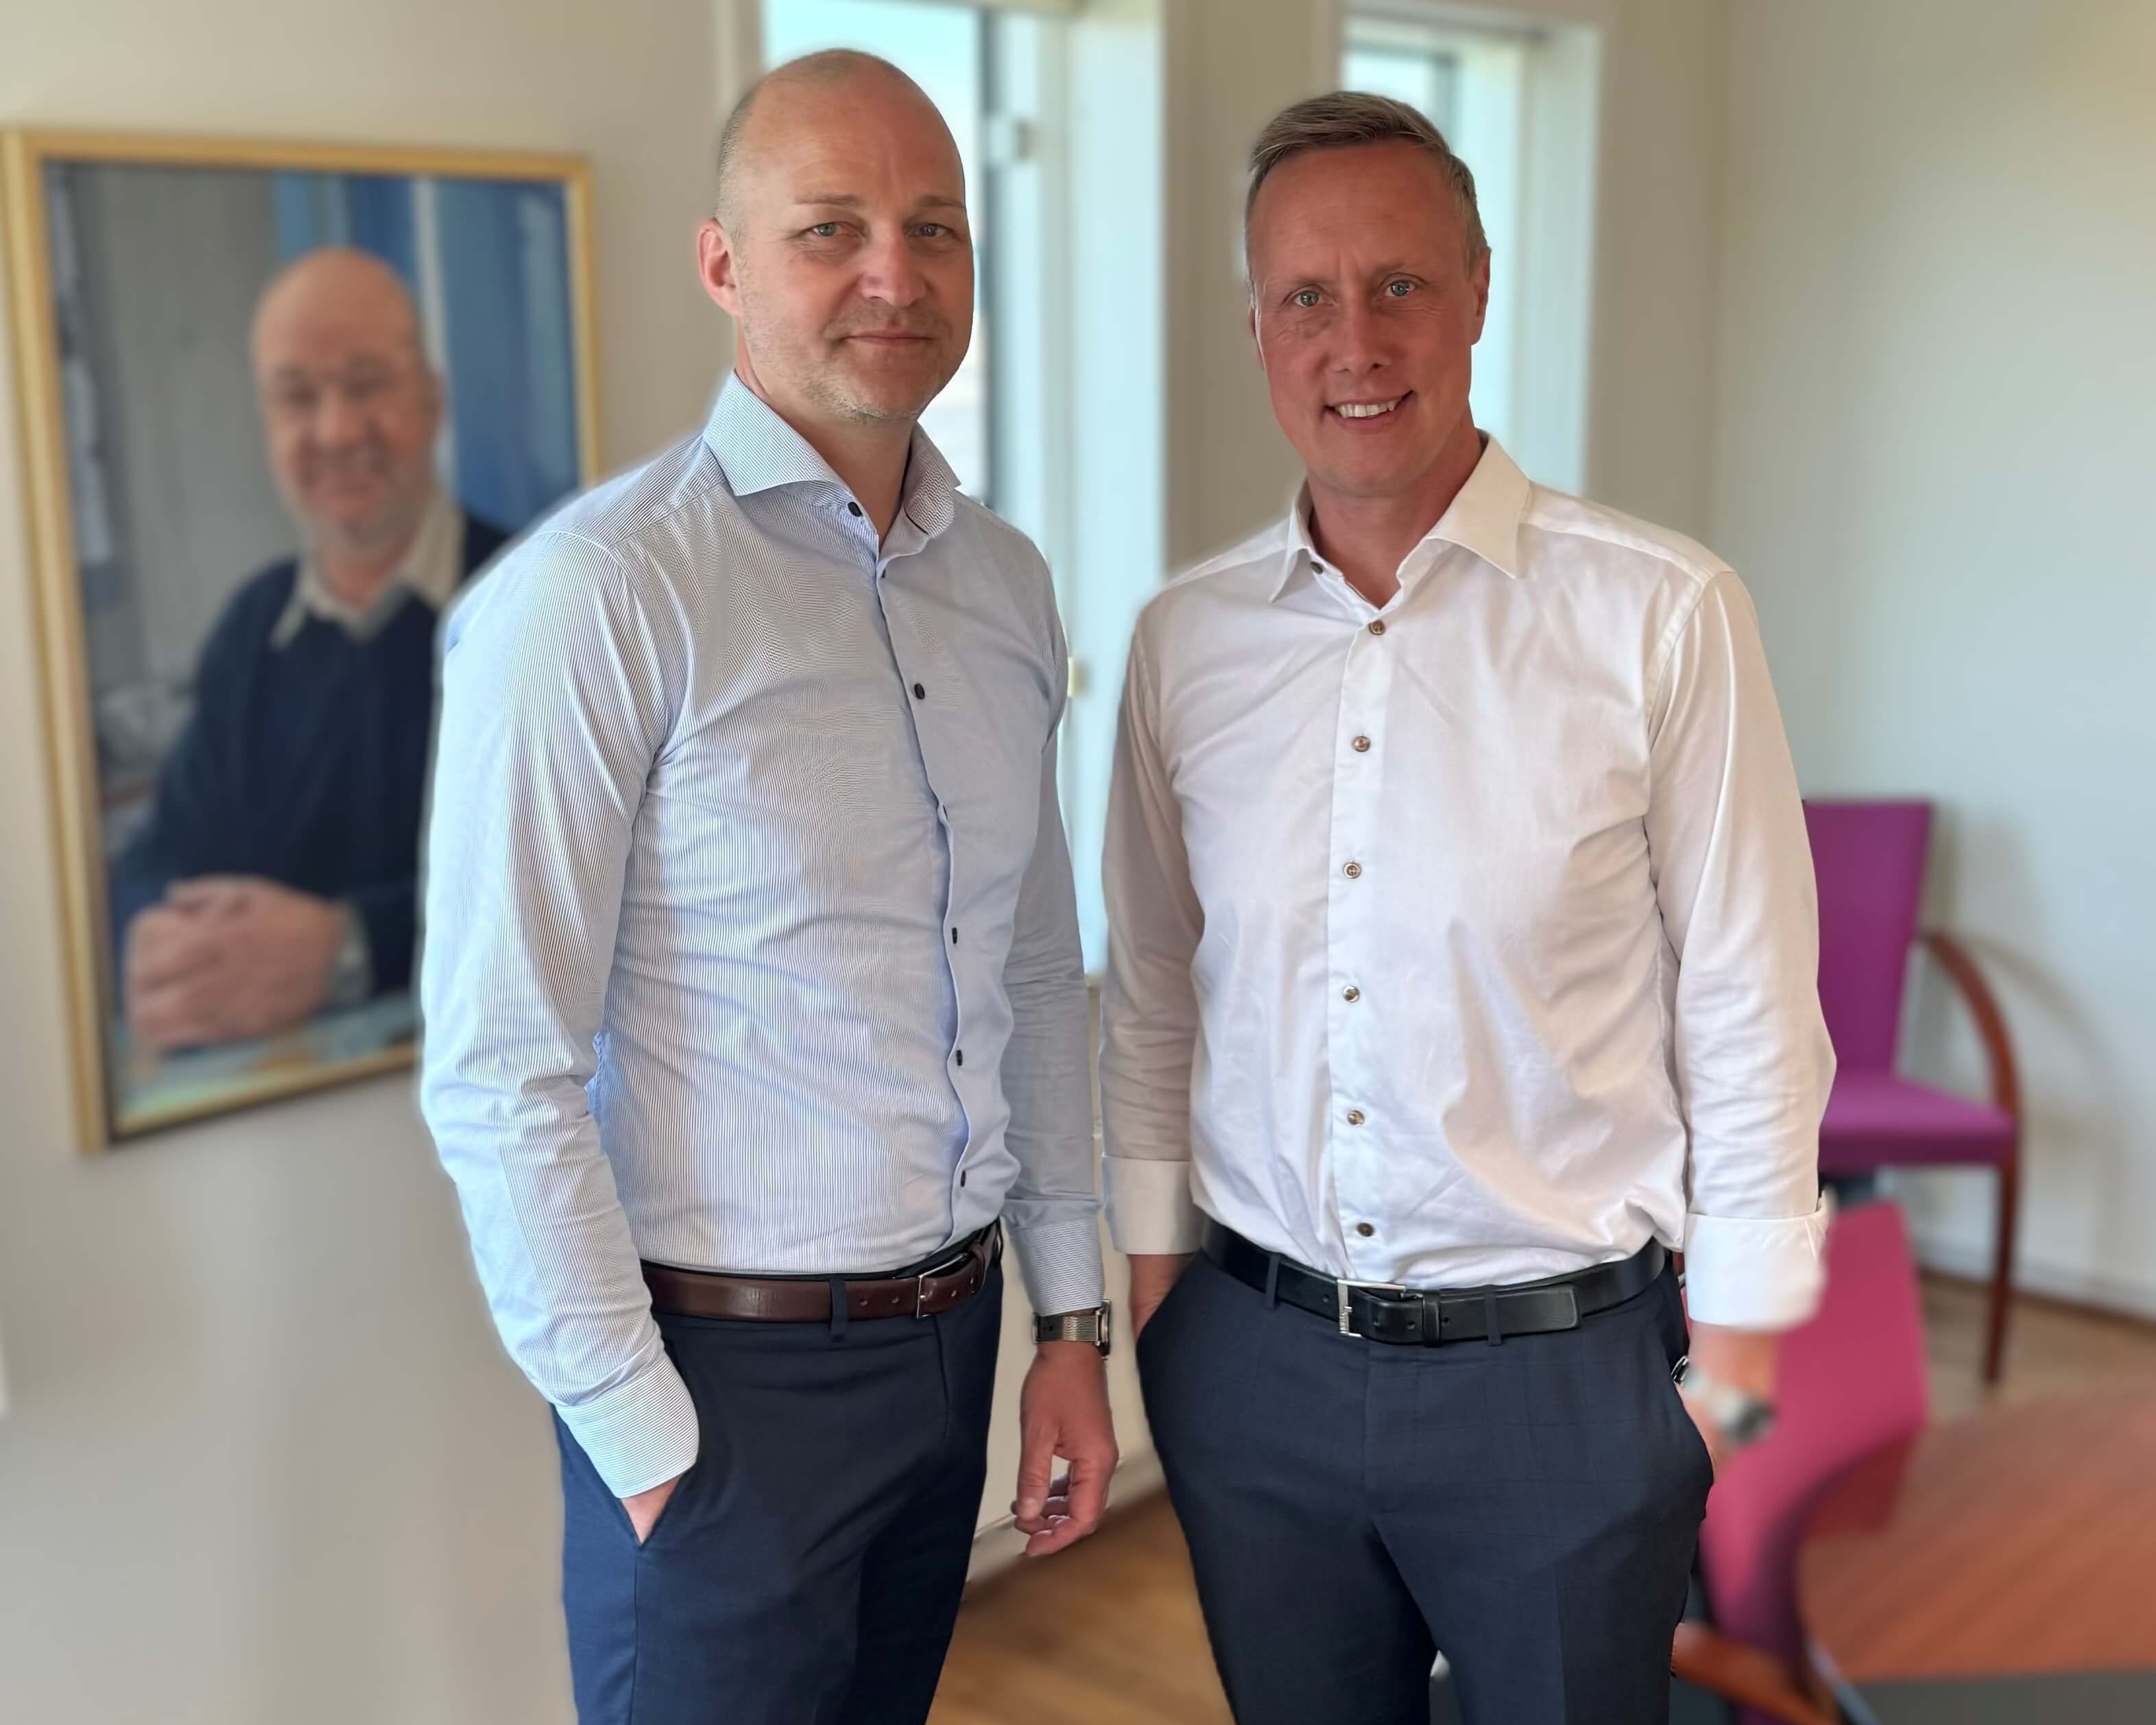 Press release: A new ambitious partnership in LYNDDAHL Group